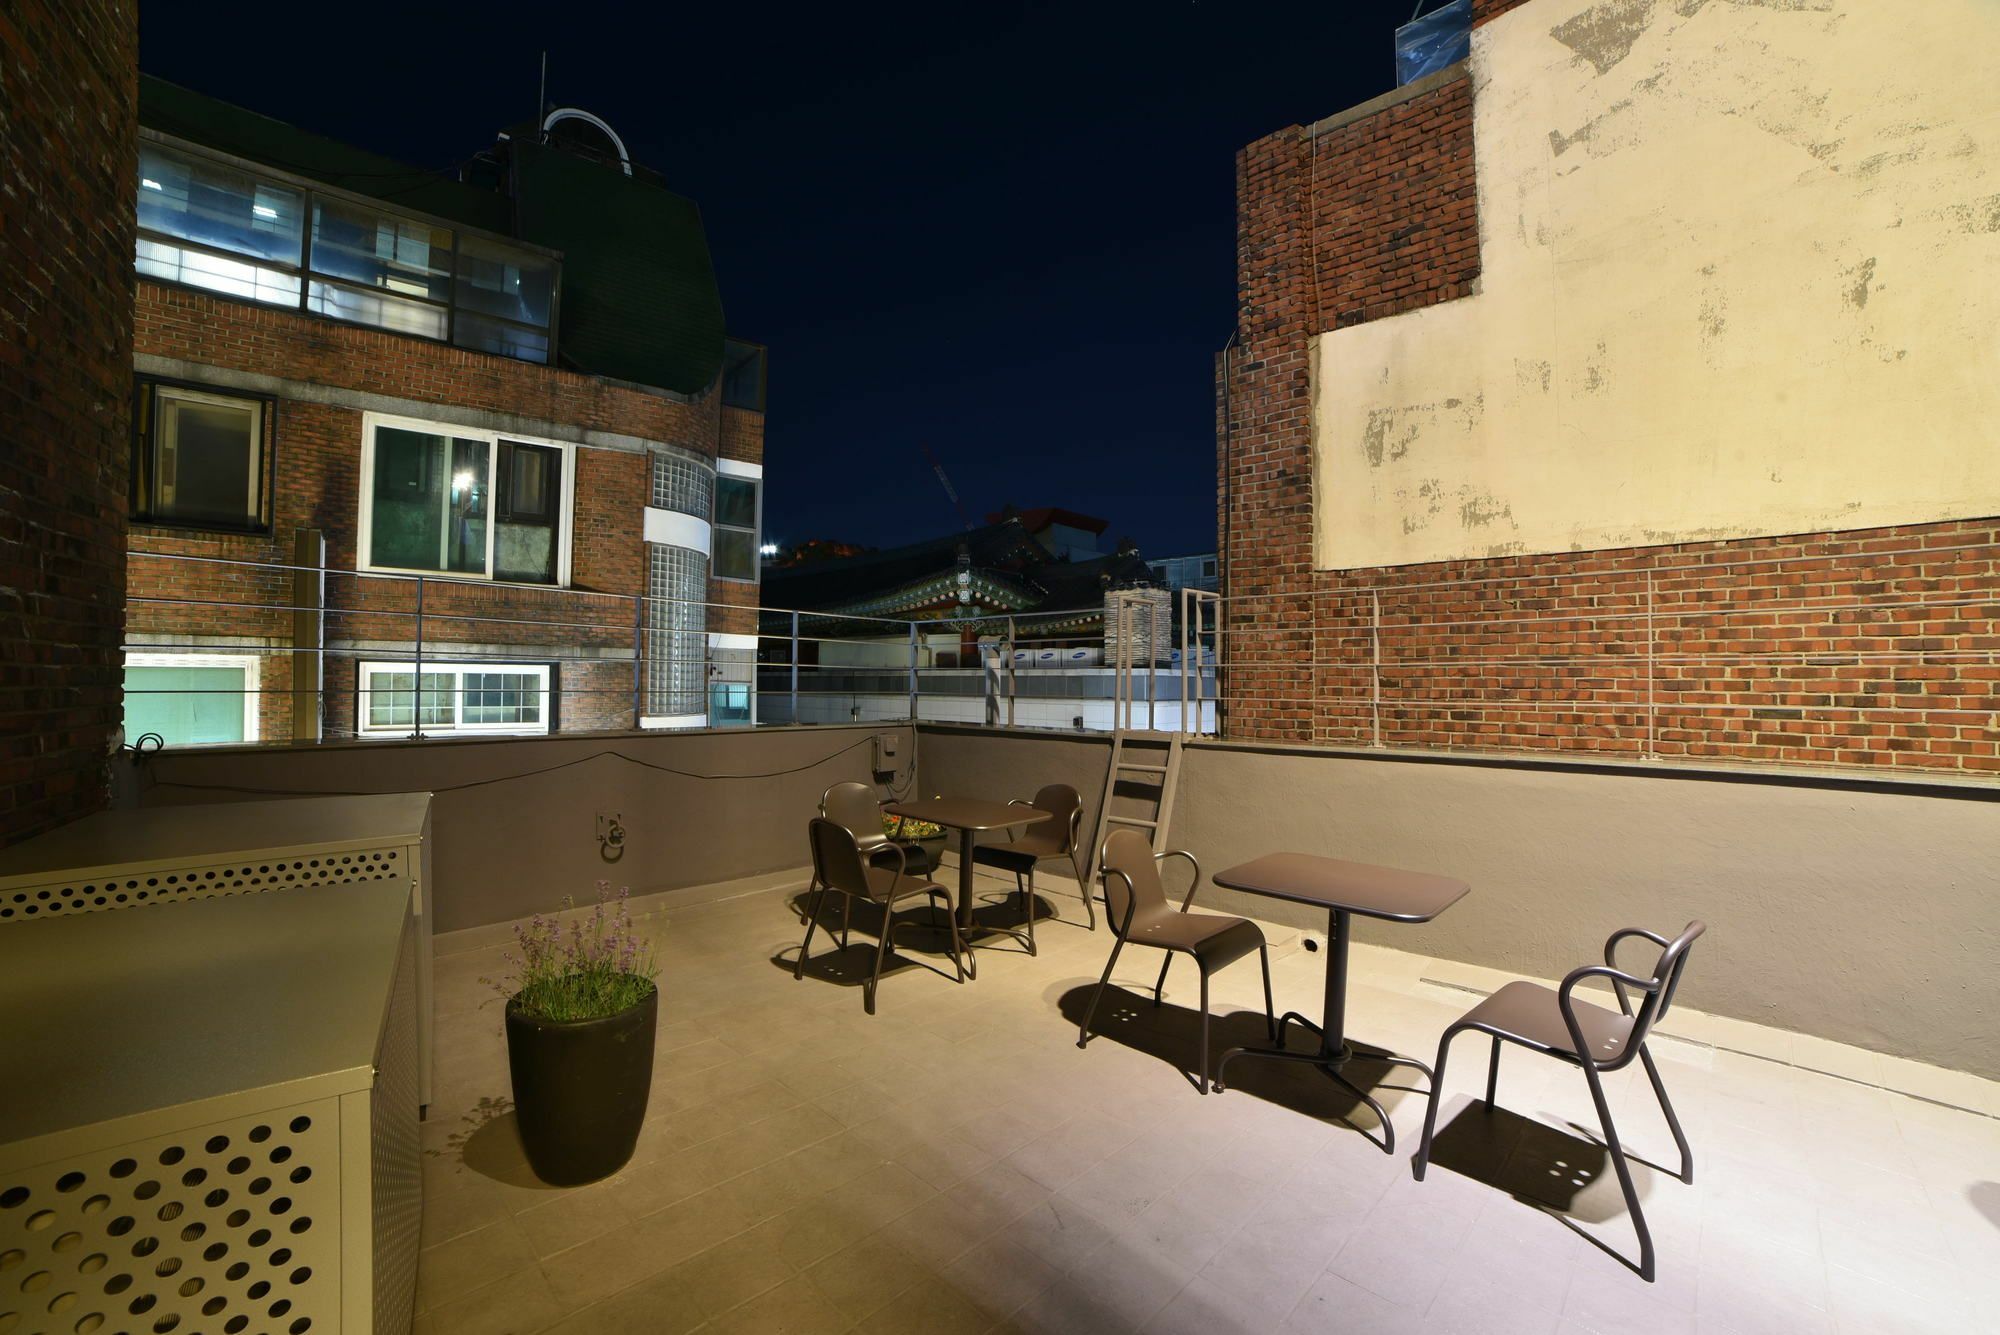 Soo Song Guest House Seoul Exterior photo